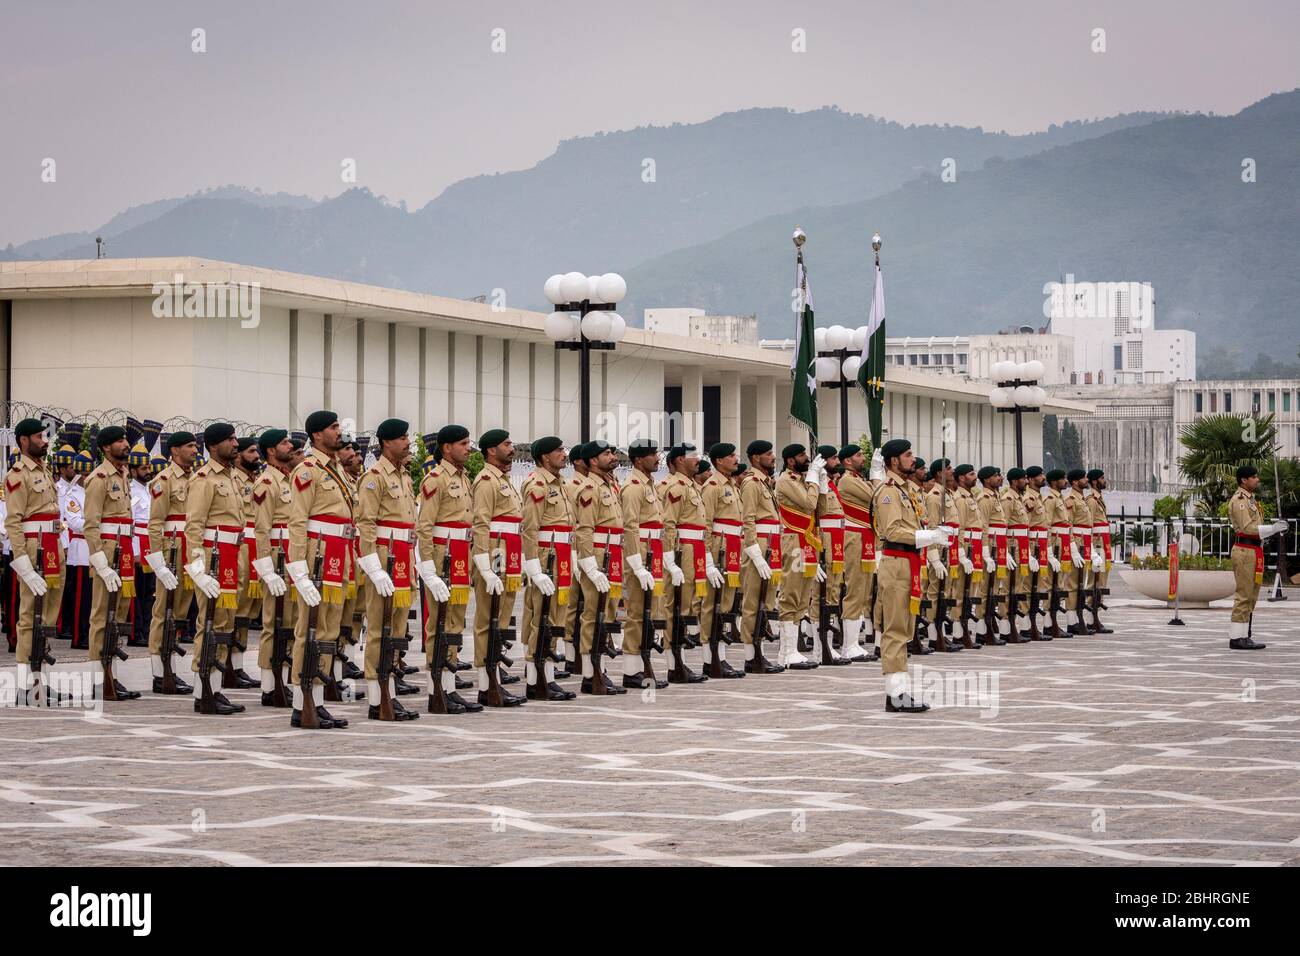 Islamabad / Pakistan - November 3, 2015: Guard of Honor Battalion of the Pakistan Army, during the official ceremony at the Aiwan-e-Sadr Presidential Stock Photo